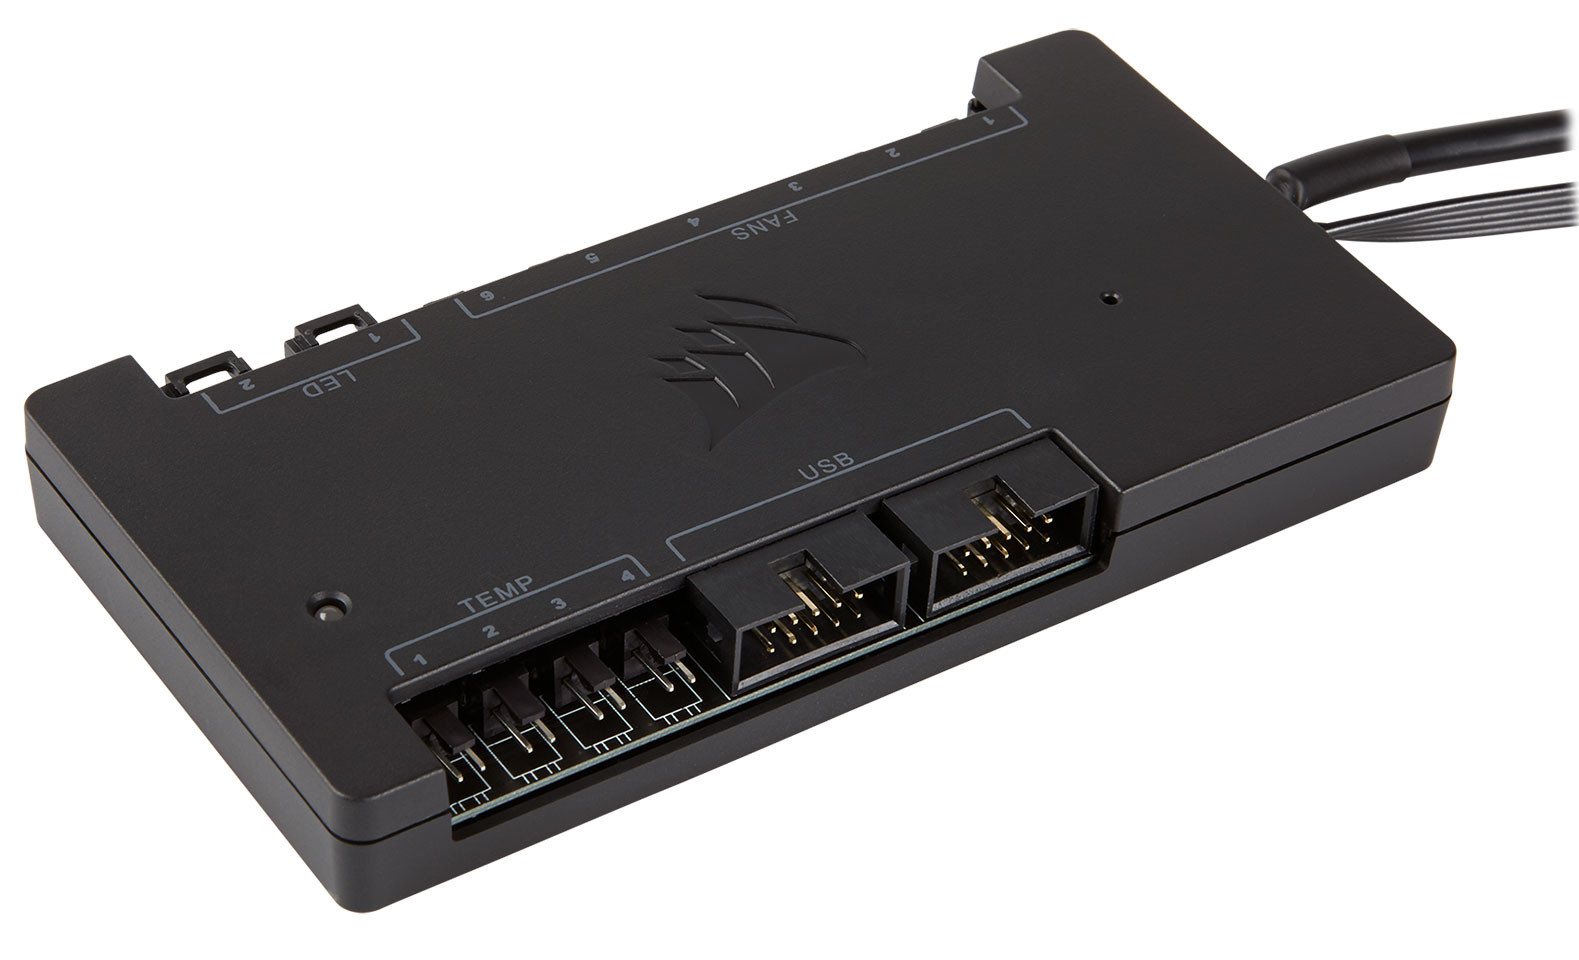 at tiltrække gift Dodge Corsair Announces New LINK Fan and Lighting Controllers | TechPowerUp